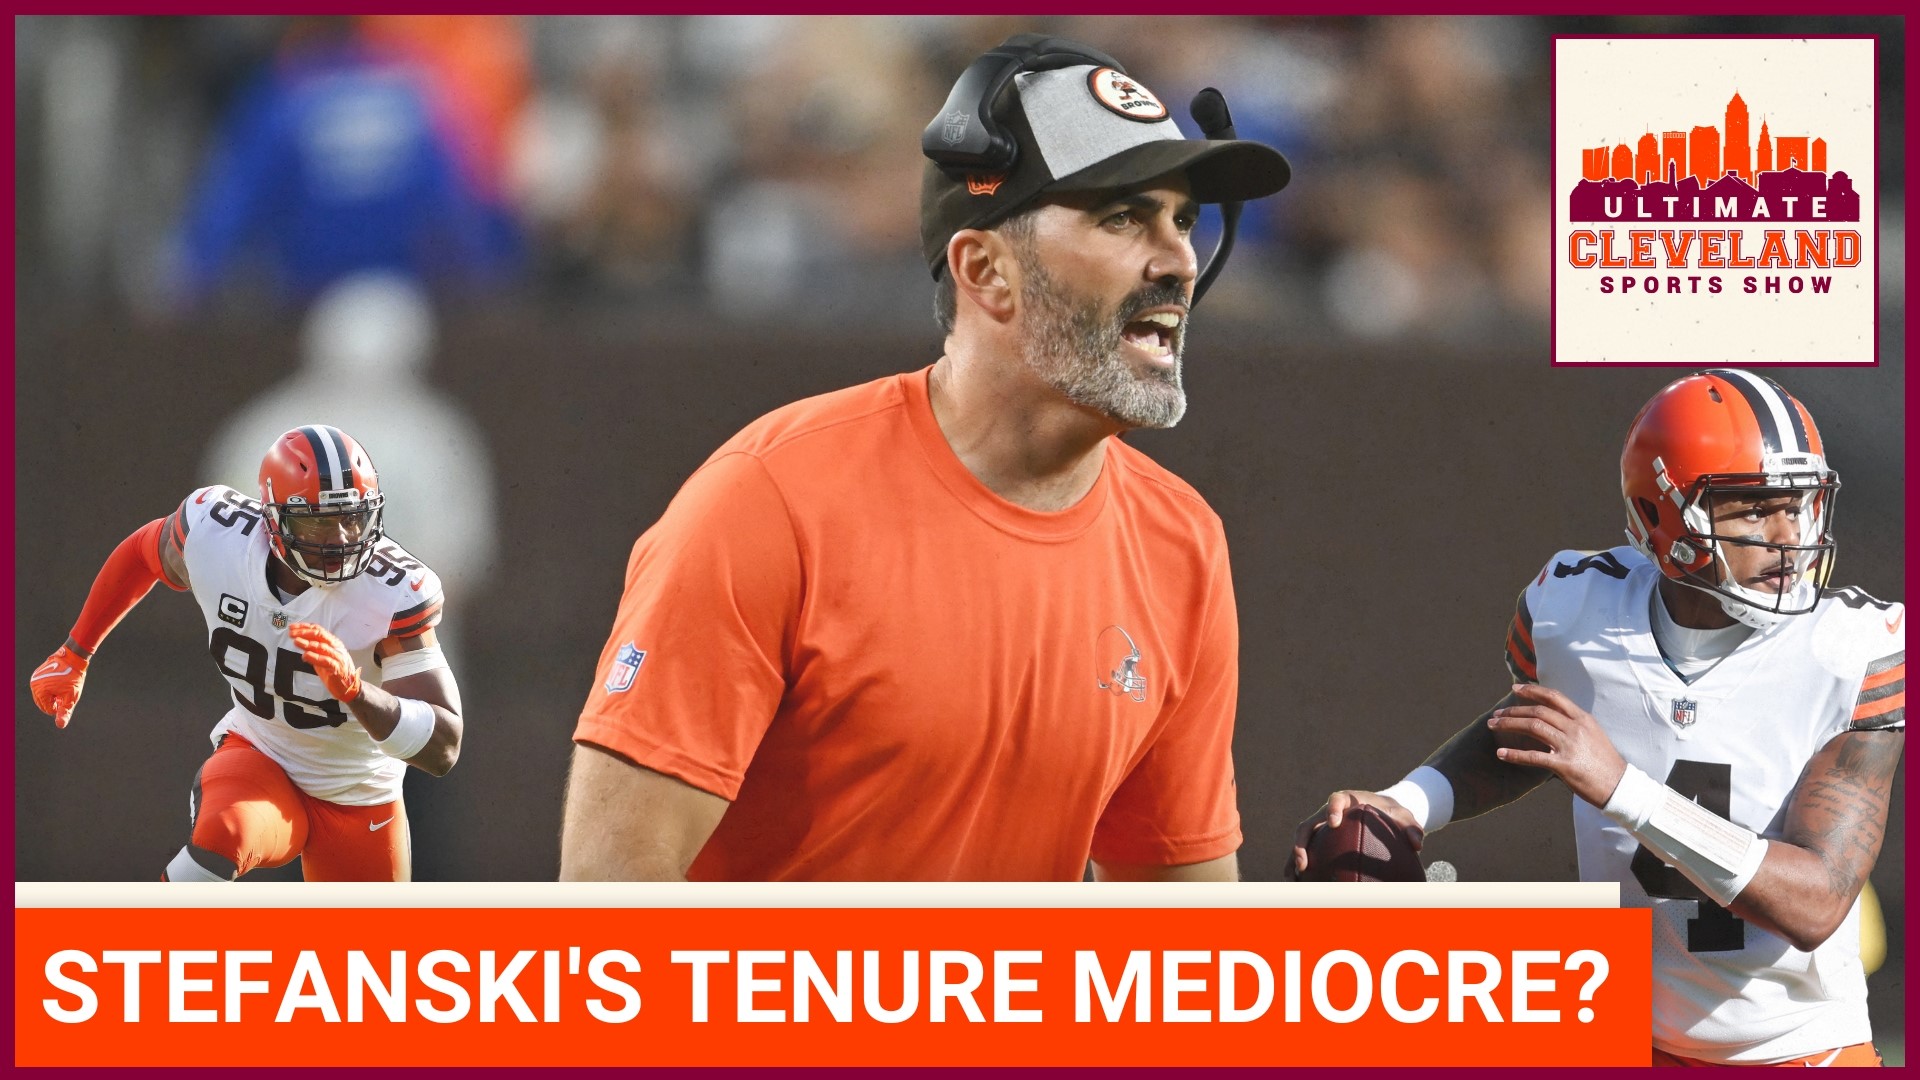 Kevin Stefanski's tenure has been mediocre and he knows year four is prove it or walk.